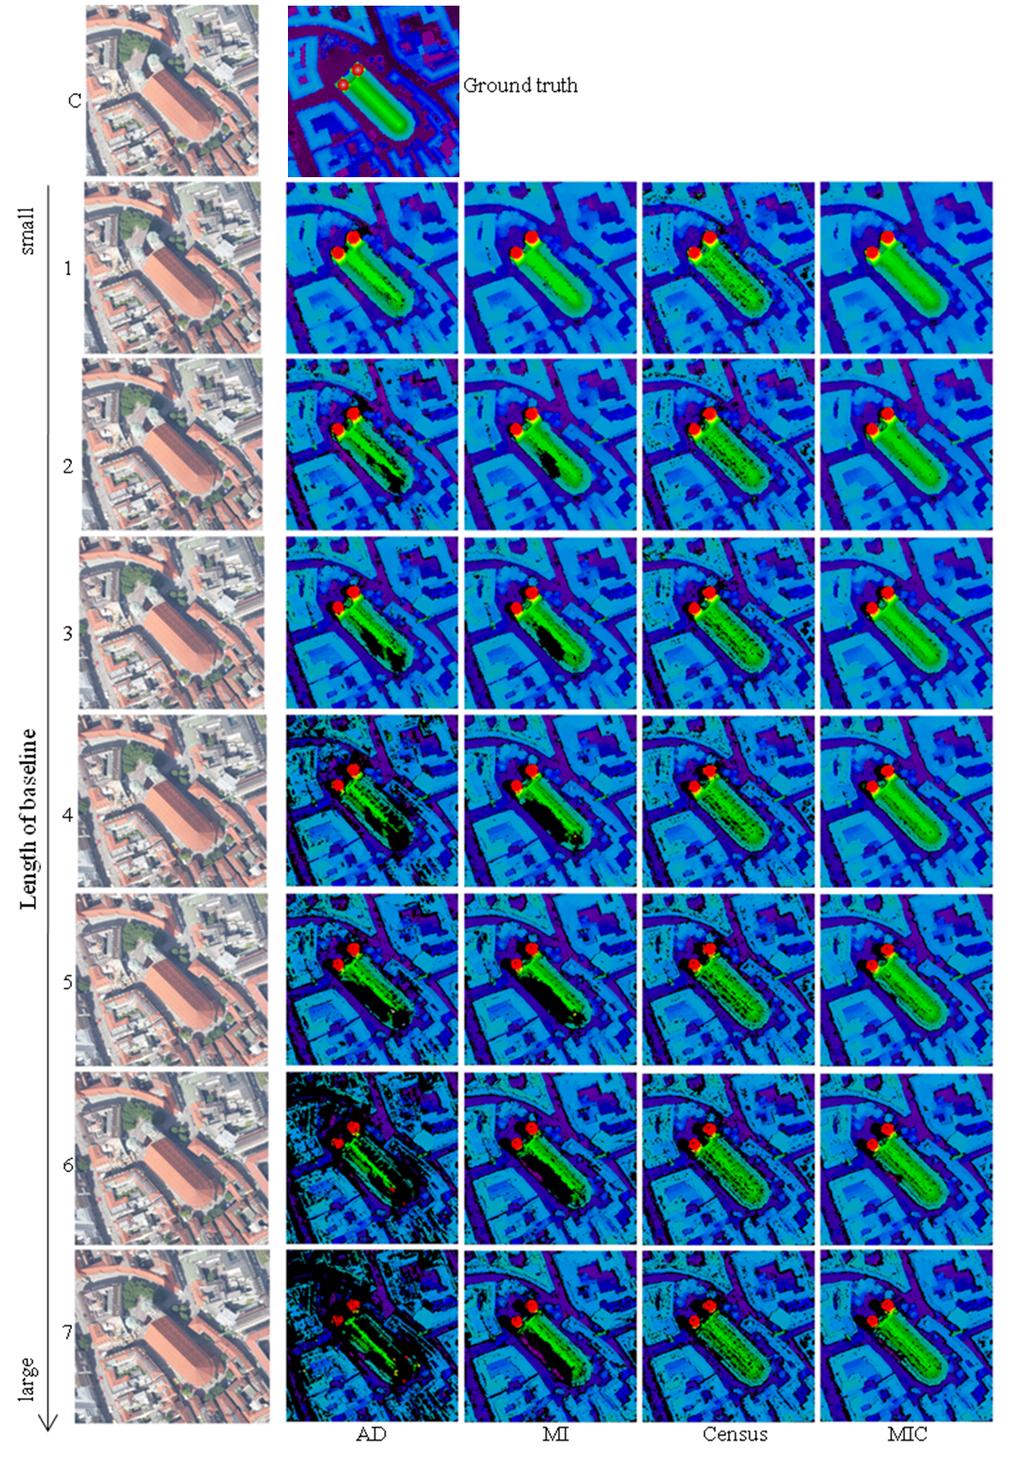 Figure 5: Disparity maps for stereo pairs with increasing baseline. The images 1 to 7 are matched with the centre image C.